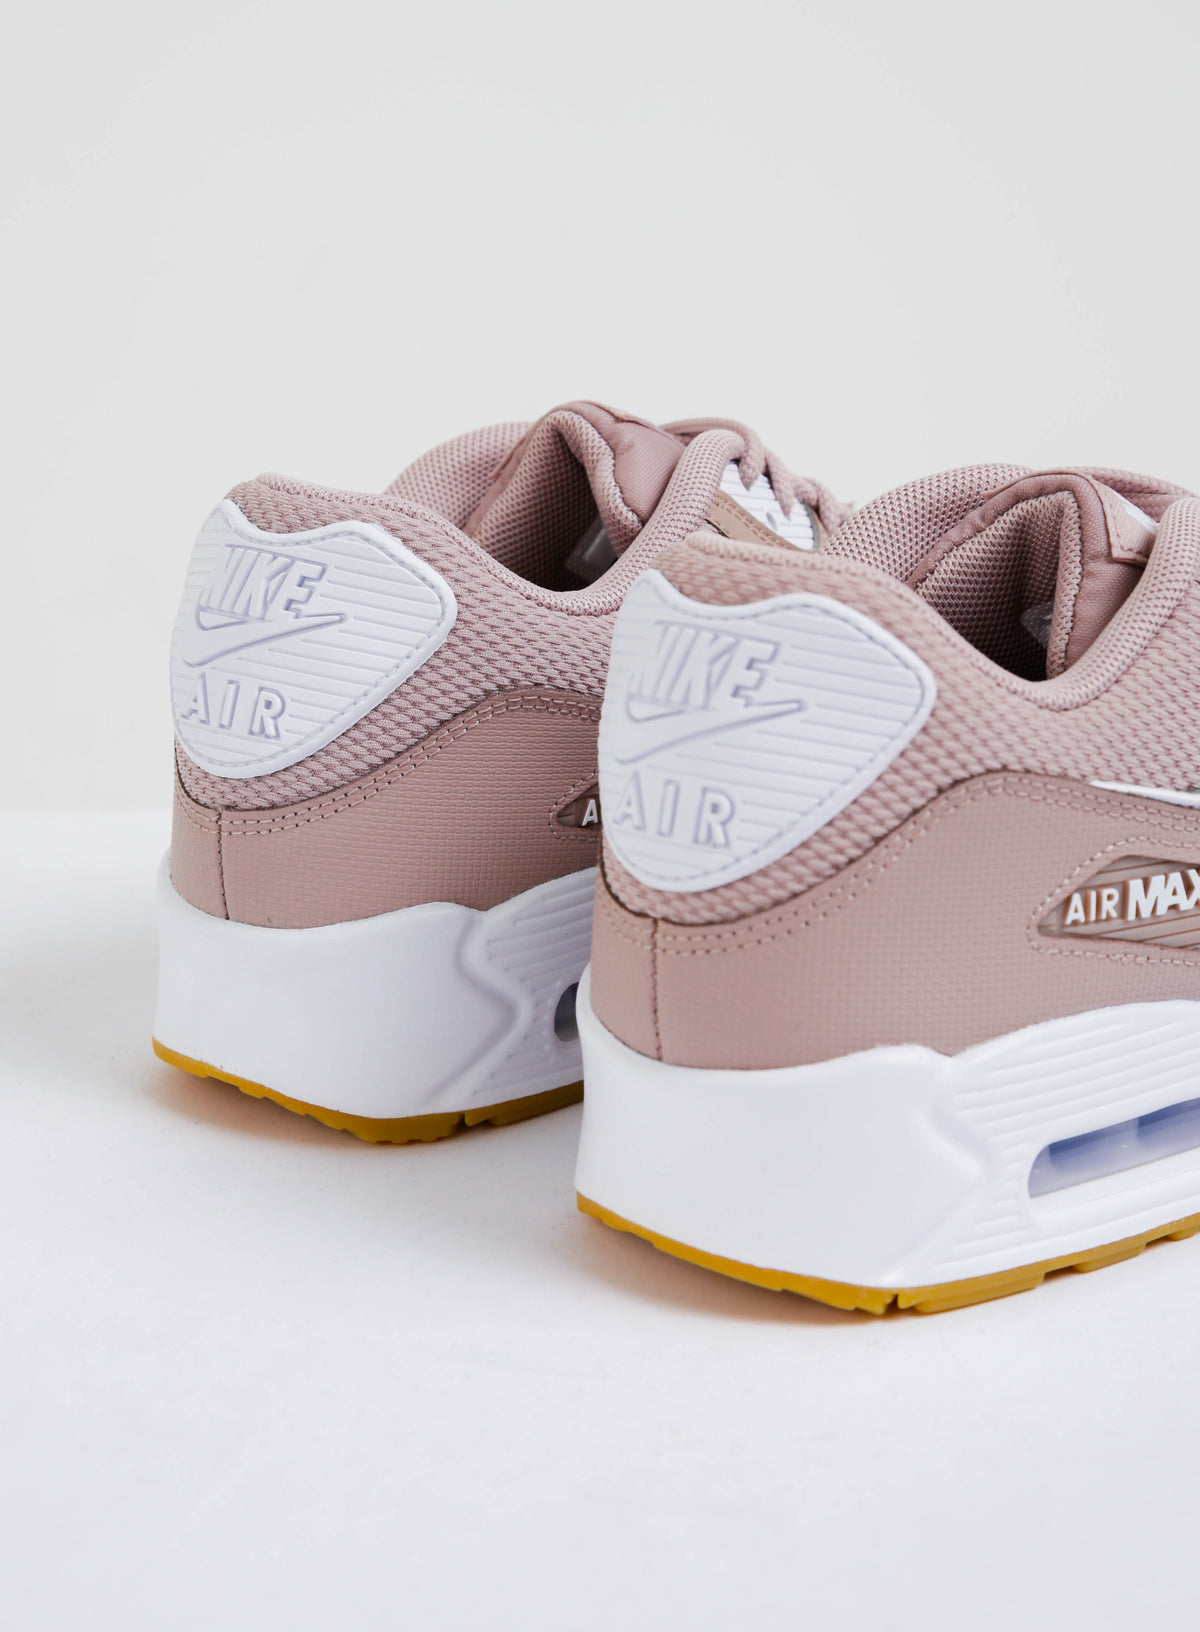 Womens Air Max 90 Sneakers in Taupe &amp; White